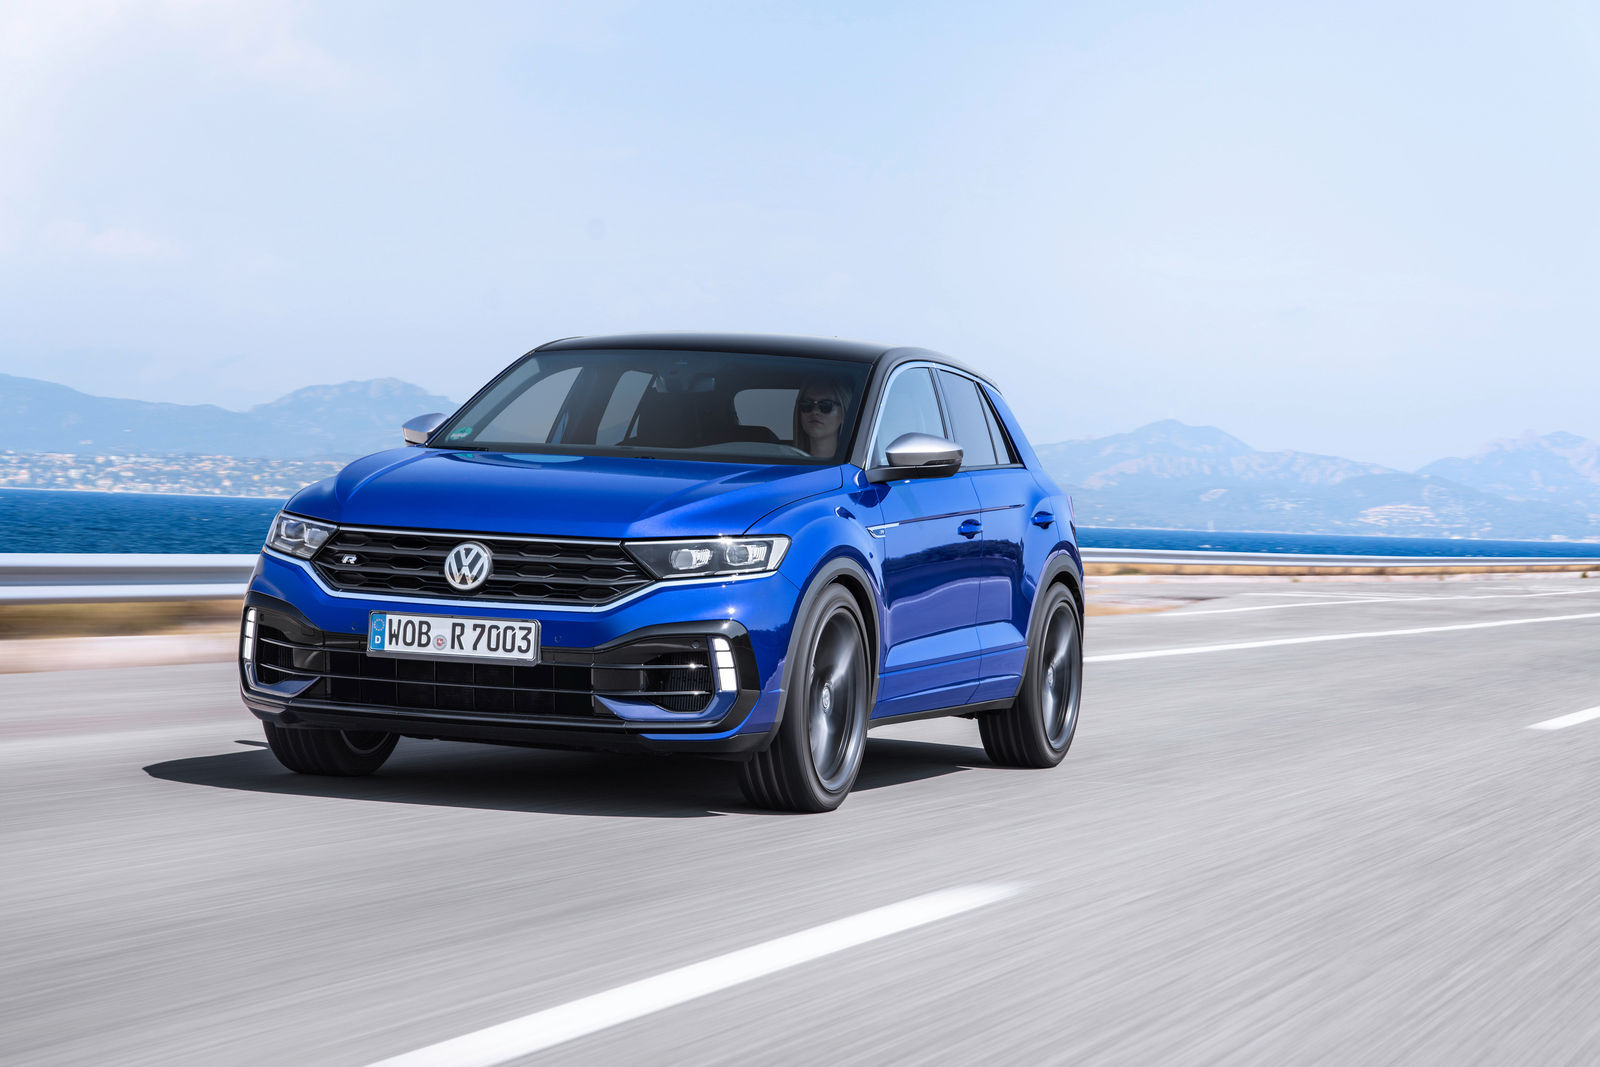 New T-Roc R combines performance and lifestyle